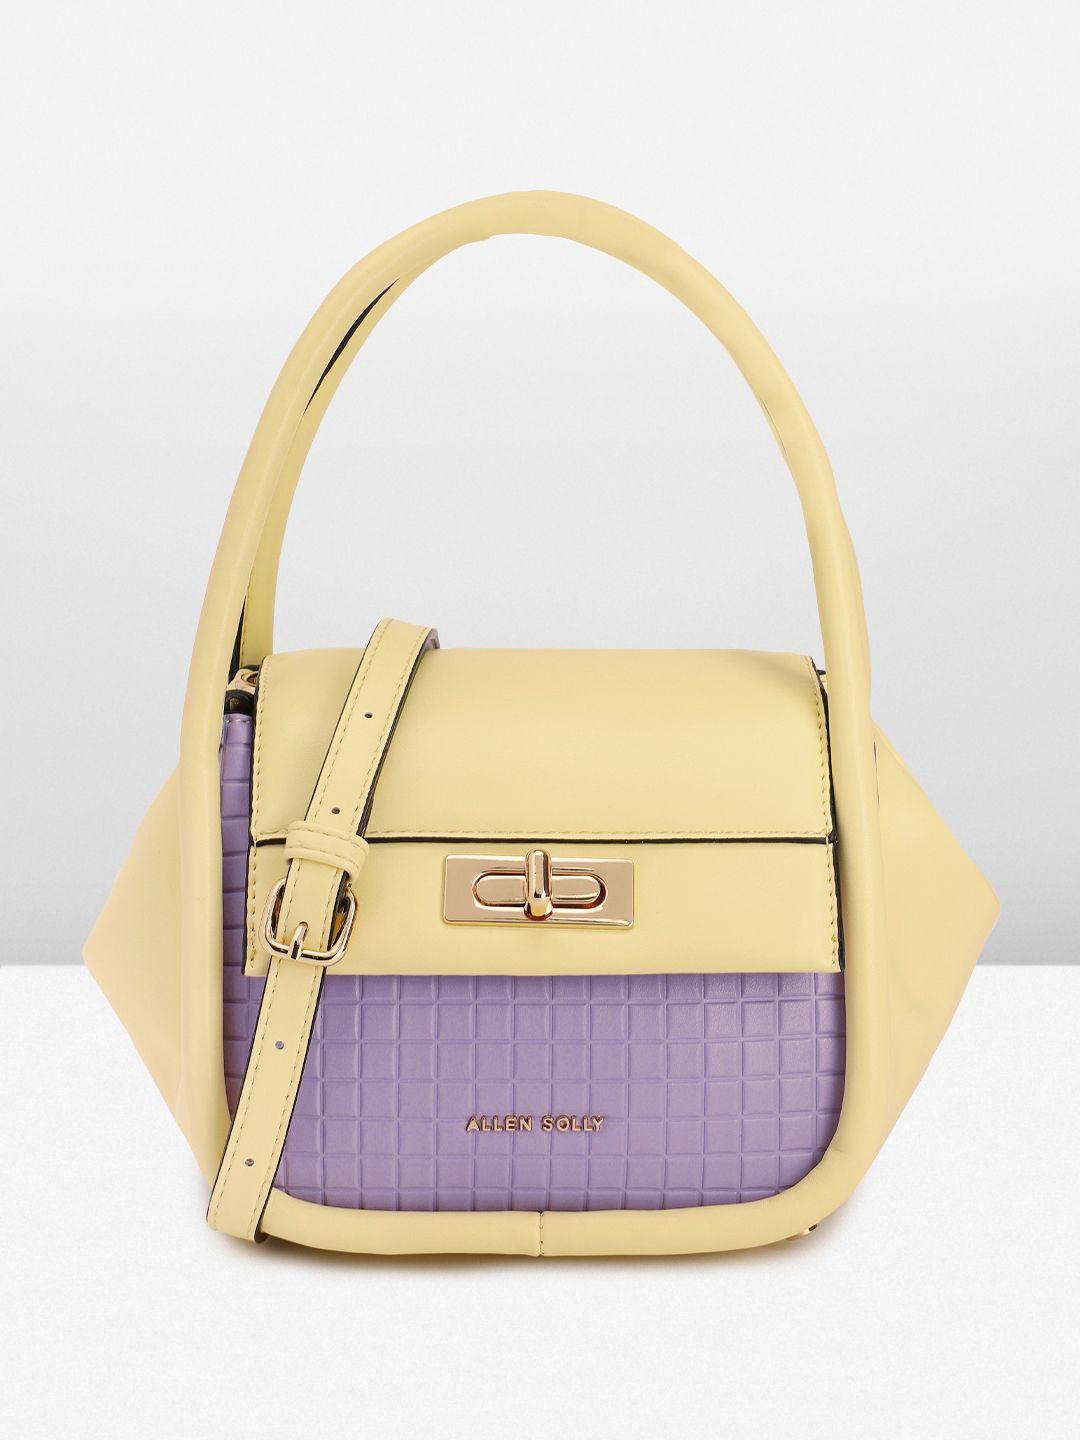 allen solly colourblocked & geometric textured pu structured handheld bag